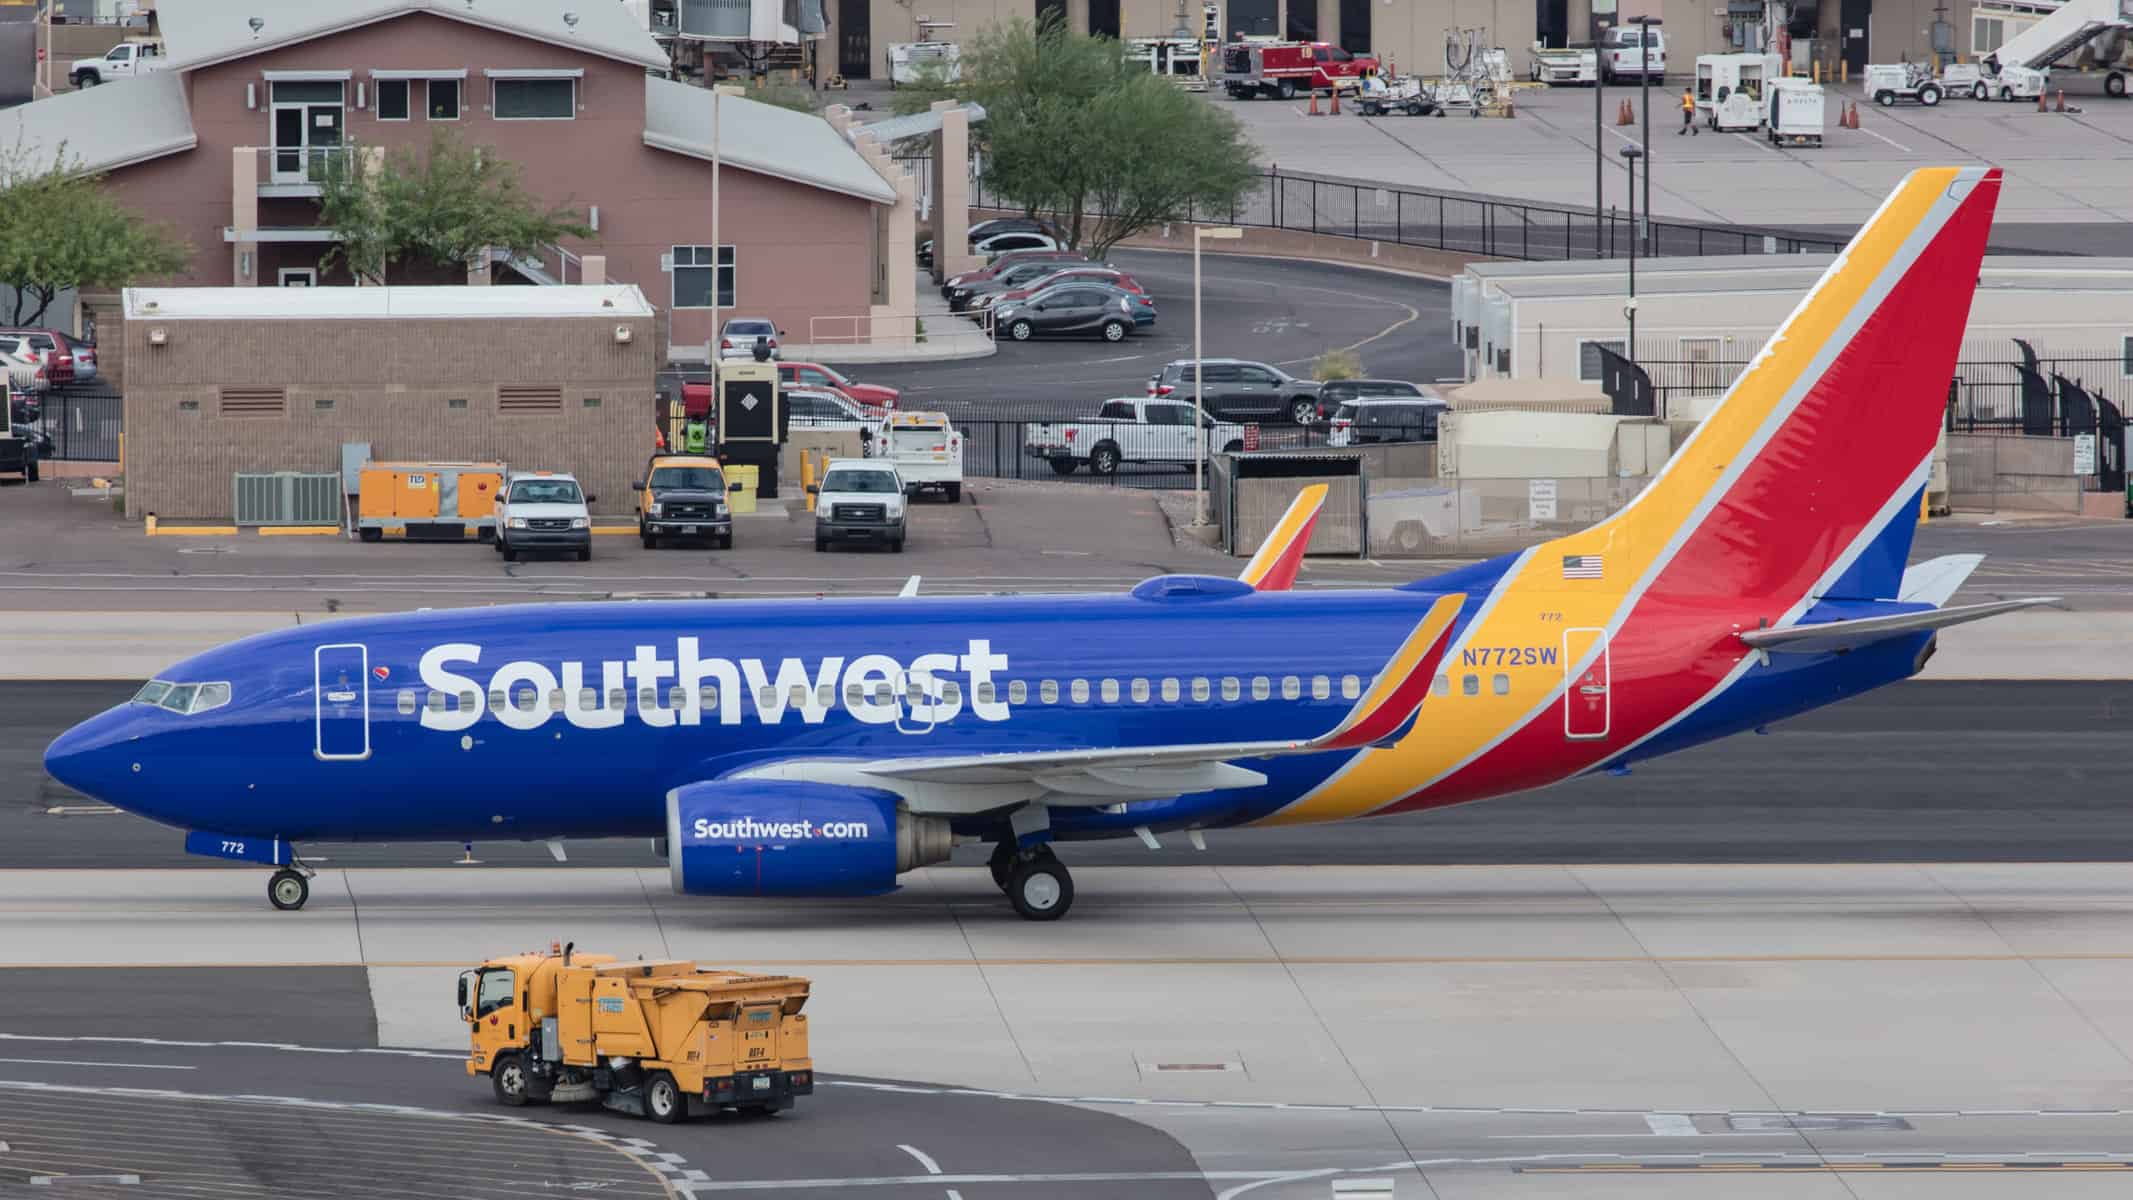 A brightly colored Southwest Airline plane is seen sitting at an airport.